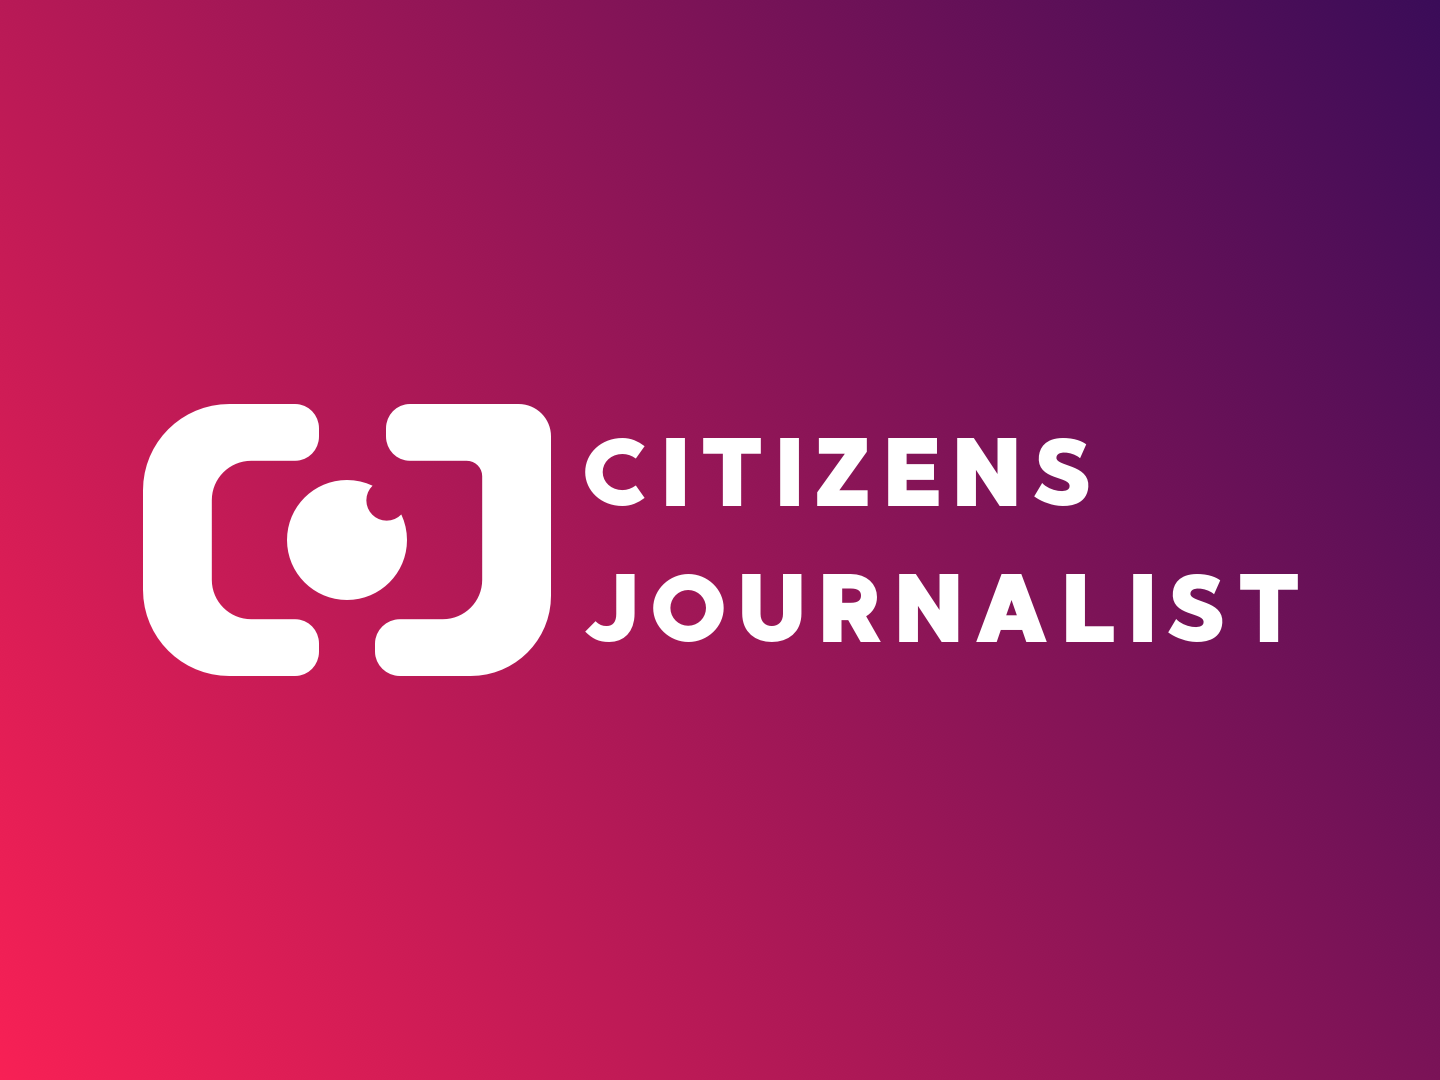 Citizens Journalist Logo  by Nick Whale on Dribbble